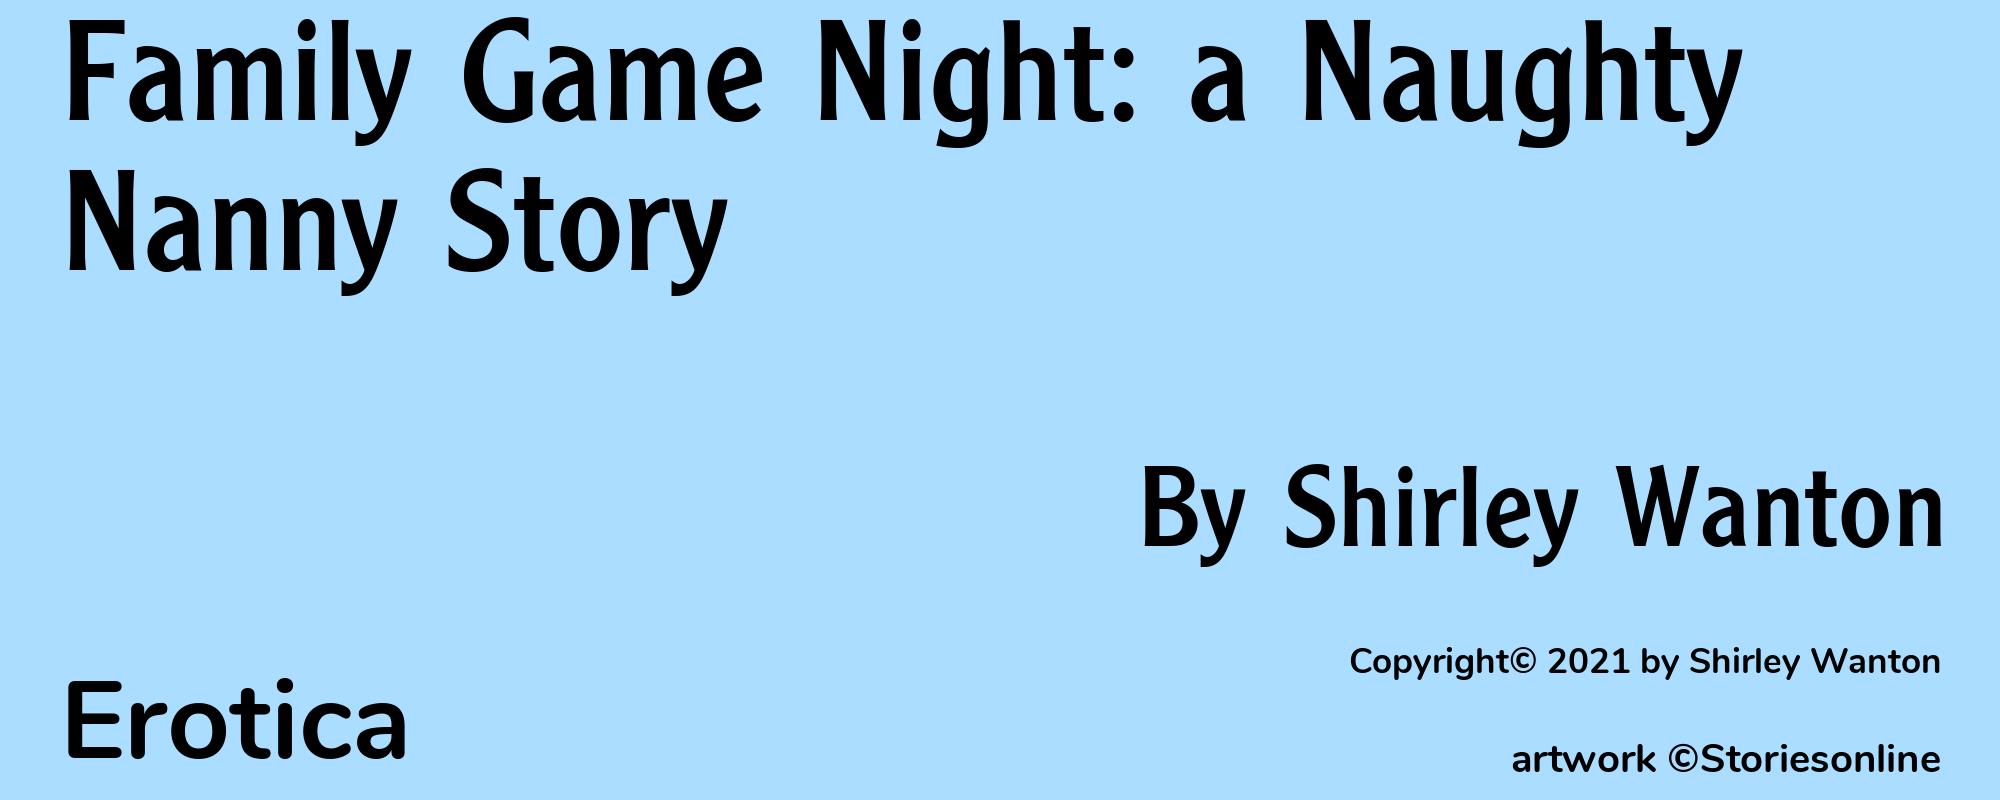 Family Game Night: a Naughty Nanny Story - Cover